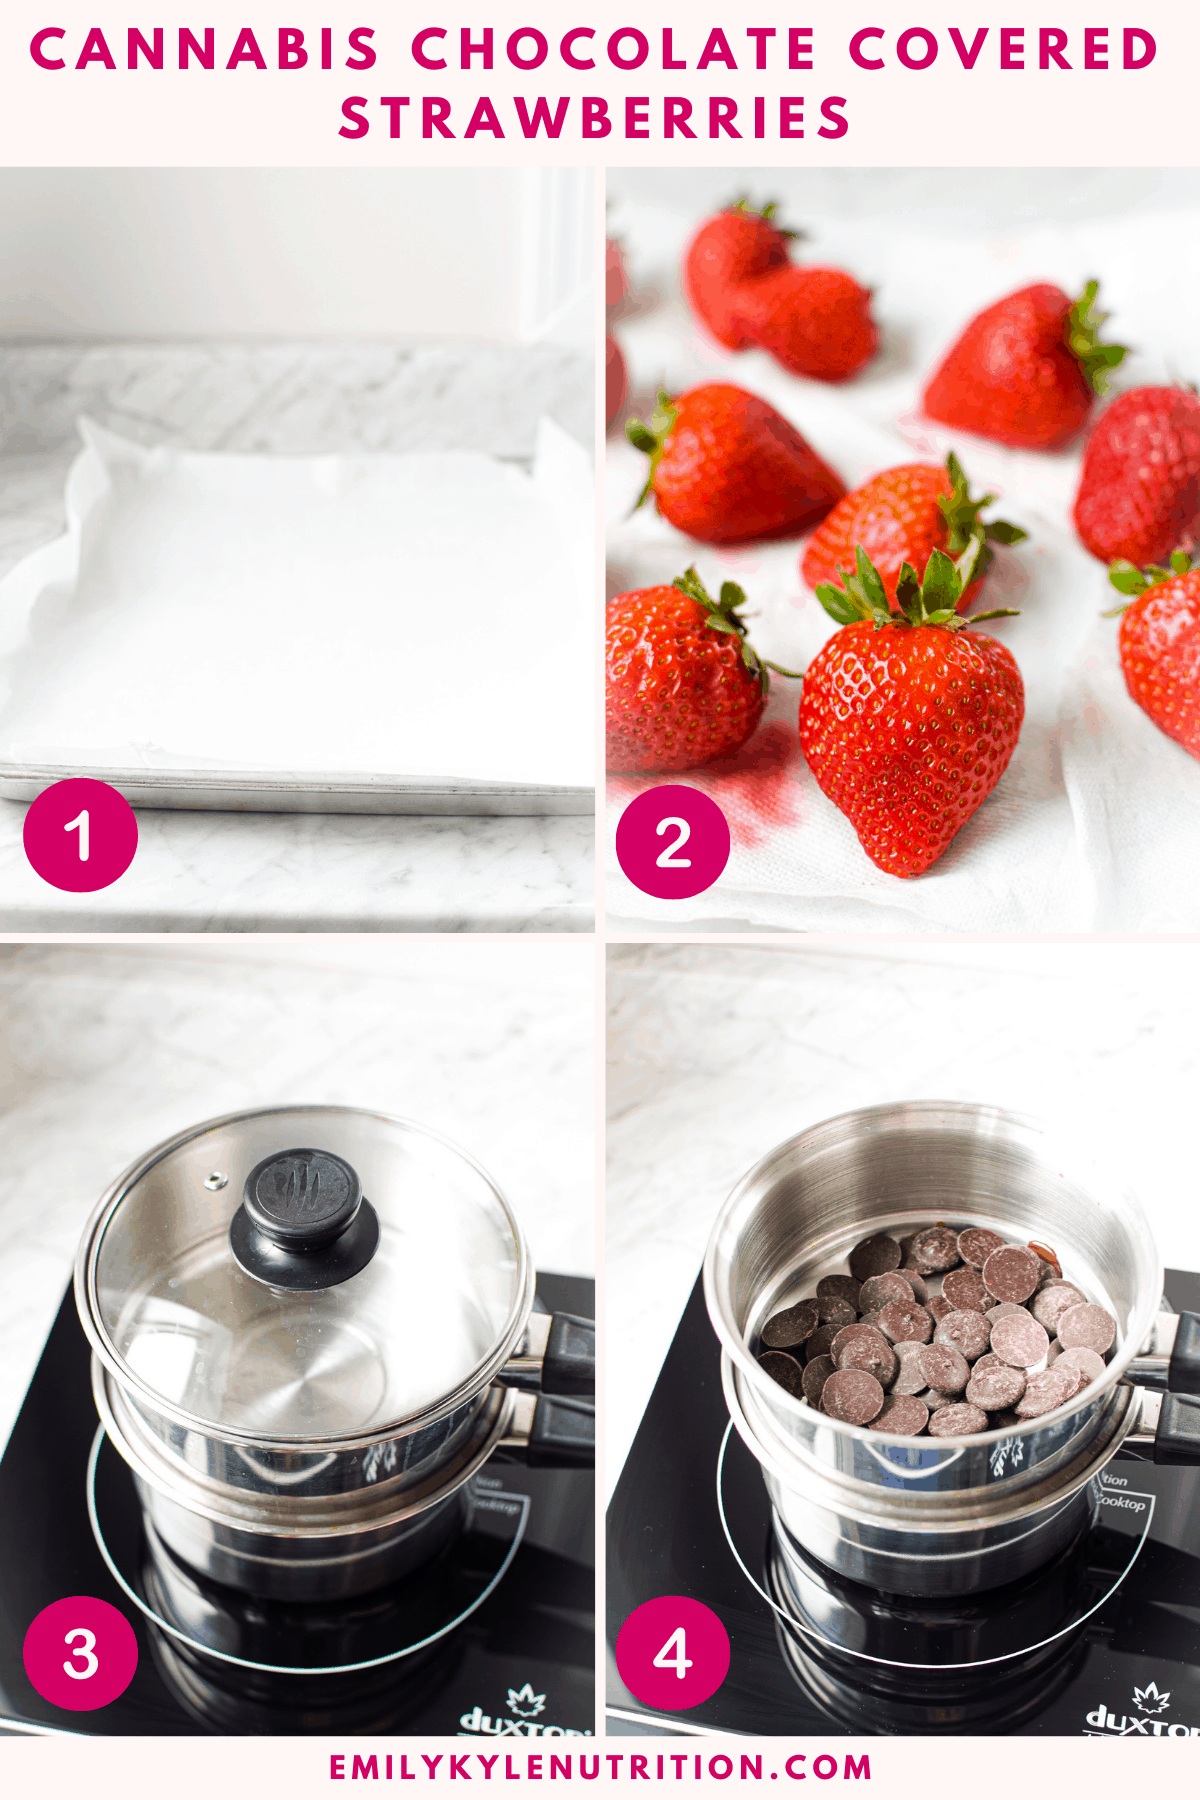 A 4 step image collage with steps 1-4 showing a parchment lined baking sheet, fresh strawberries, a double boiler and a double boiler with melting chocolates inside